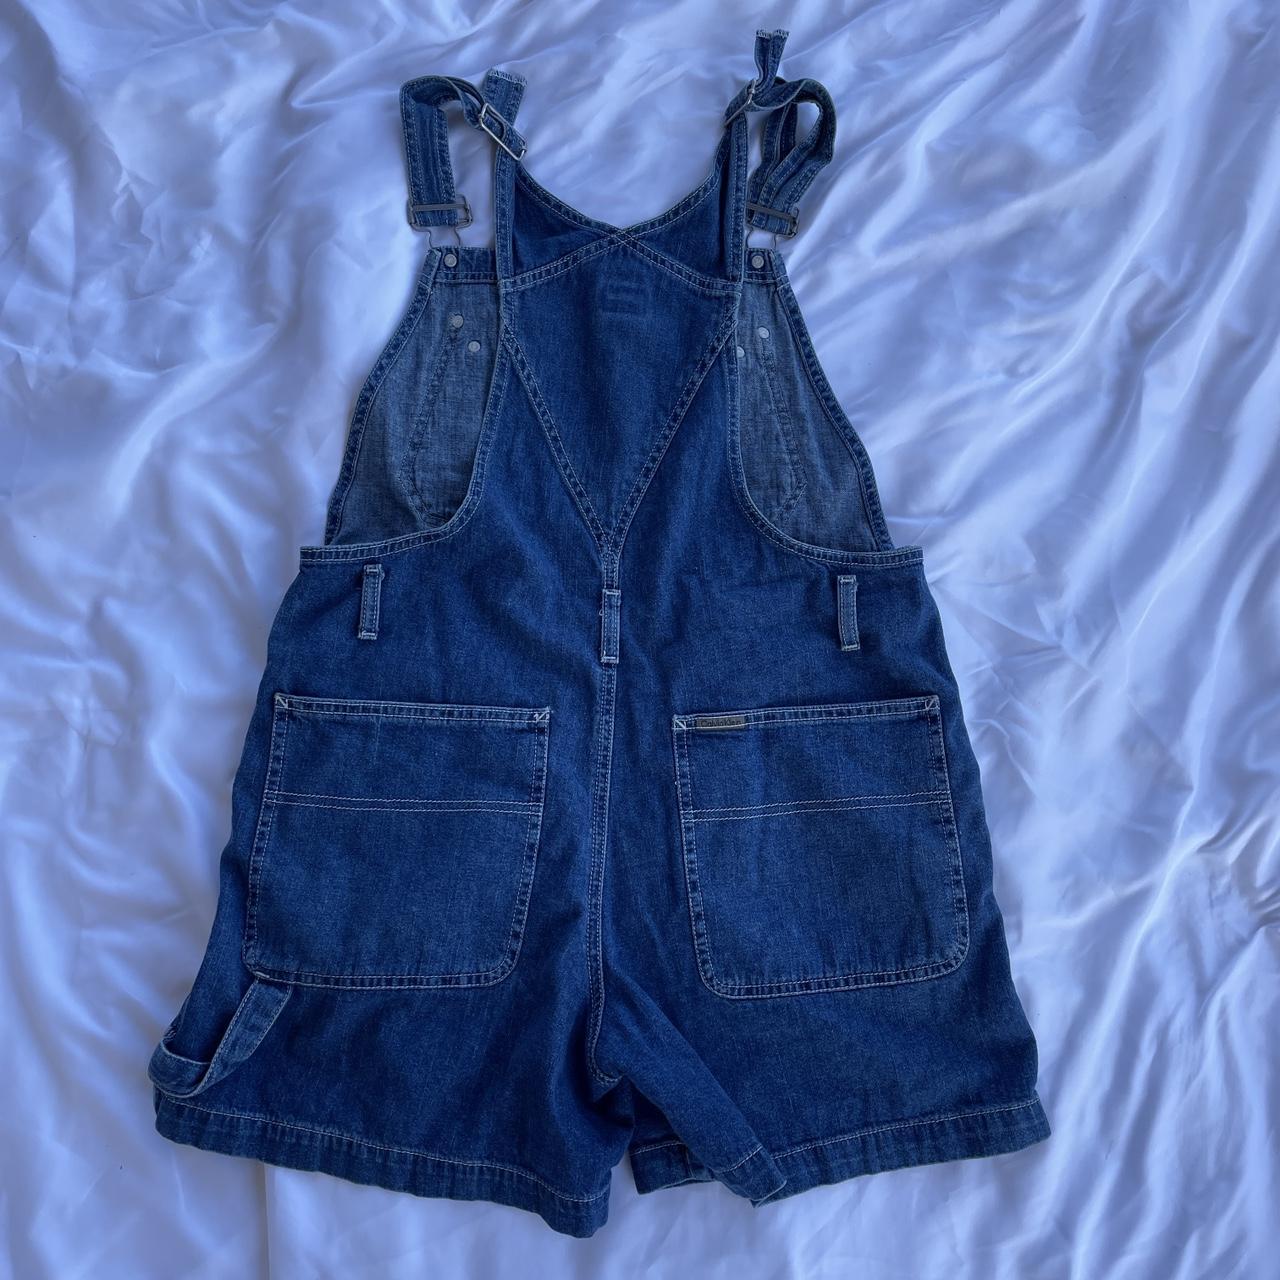 Calvin Klein Jeans Women's Navy and Blue Dungarees-overalls (4)